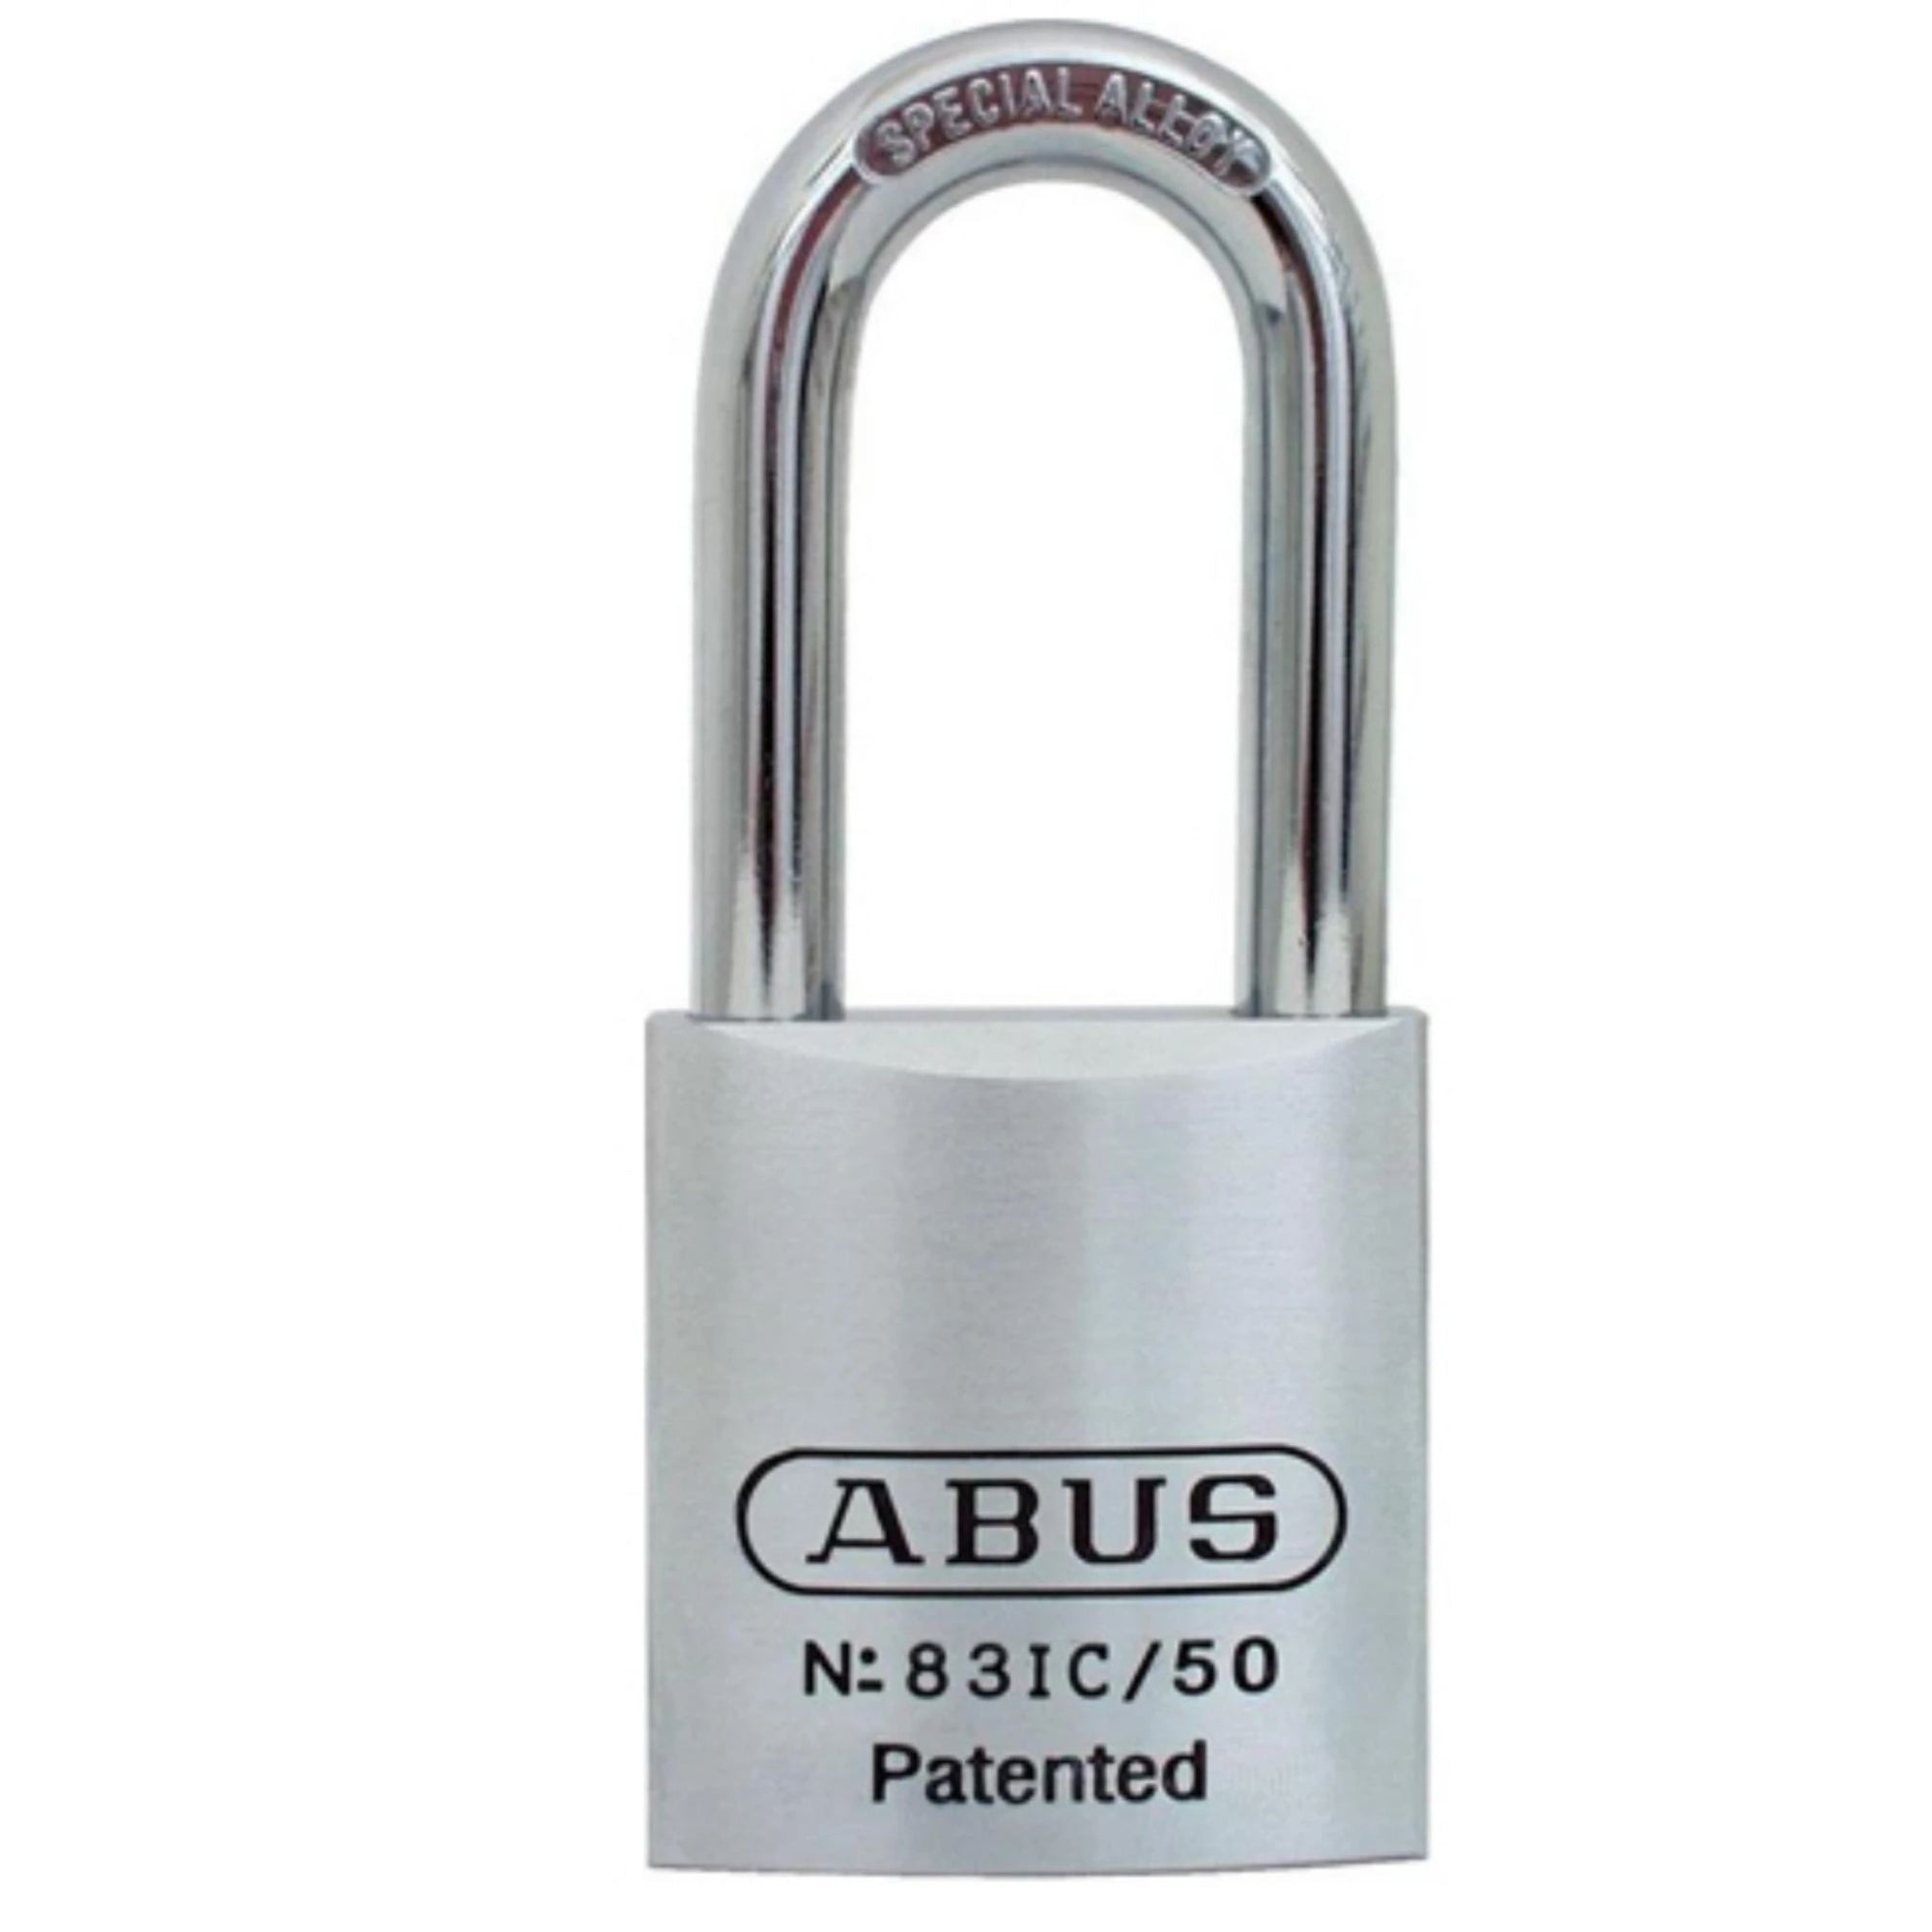 Abus 83IC/50 Chrome Lock Fits OEM Small Format IC Cores with 3-Inch Shackle - The Lock Source